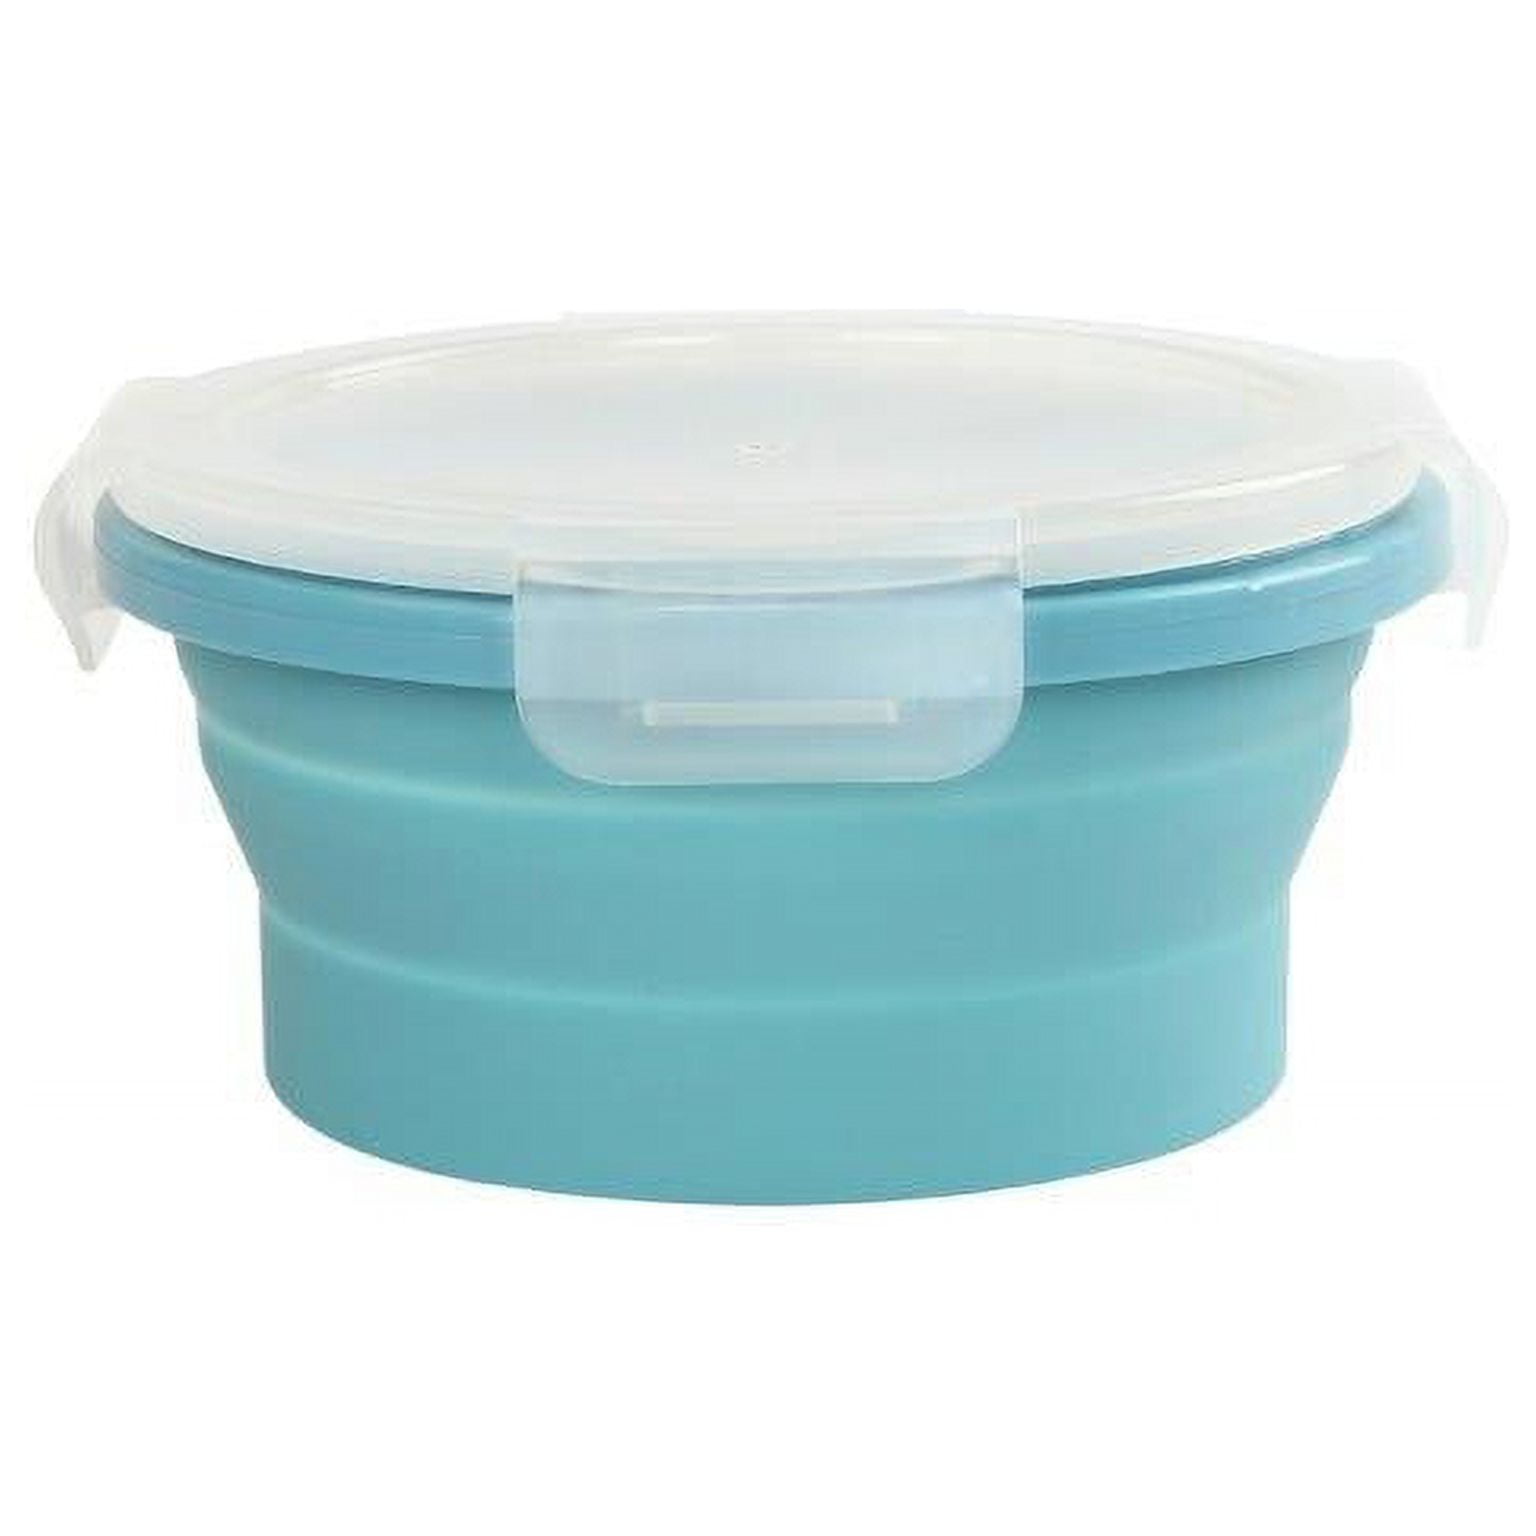 Storable Solutions 12 Cup Collapsible Covered Silicone Storage